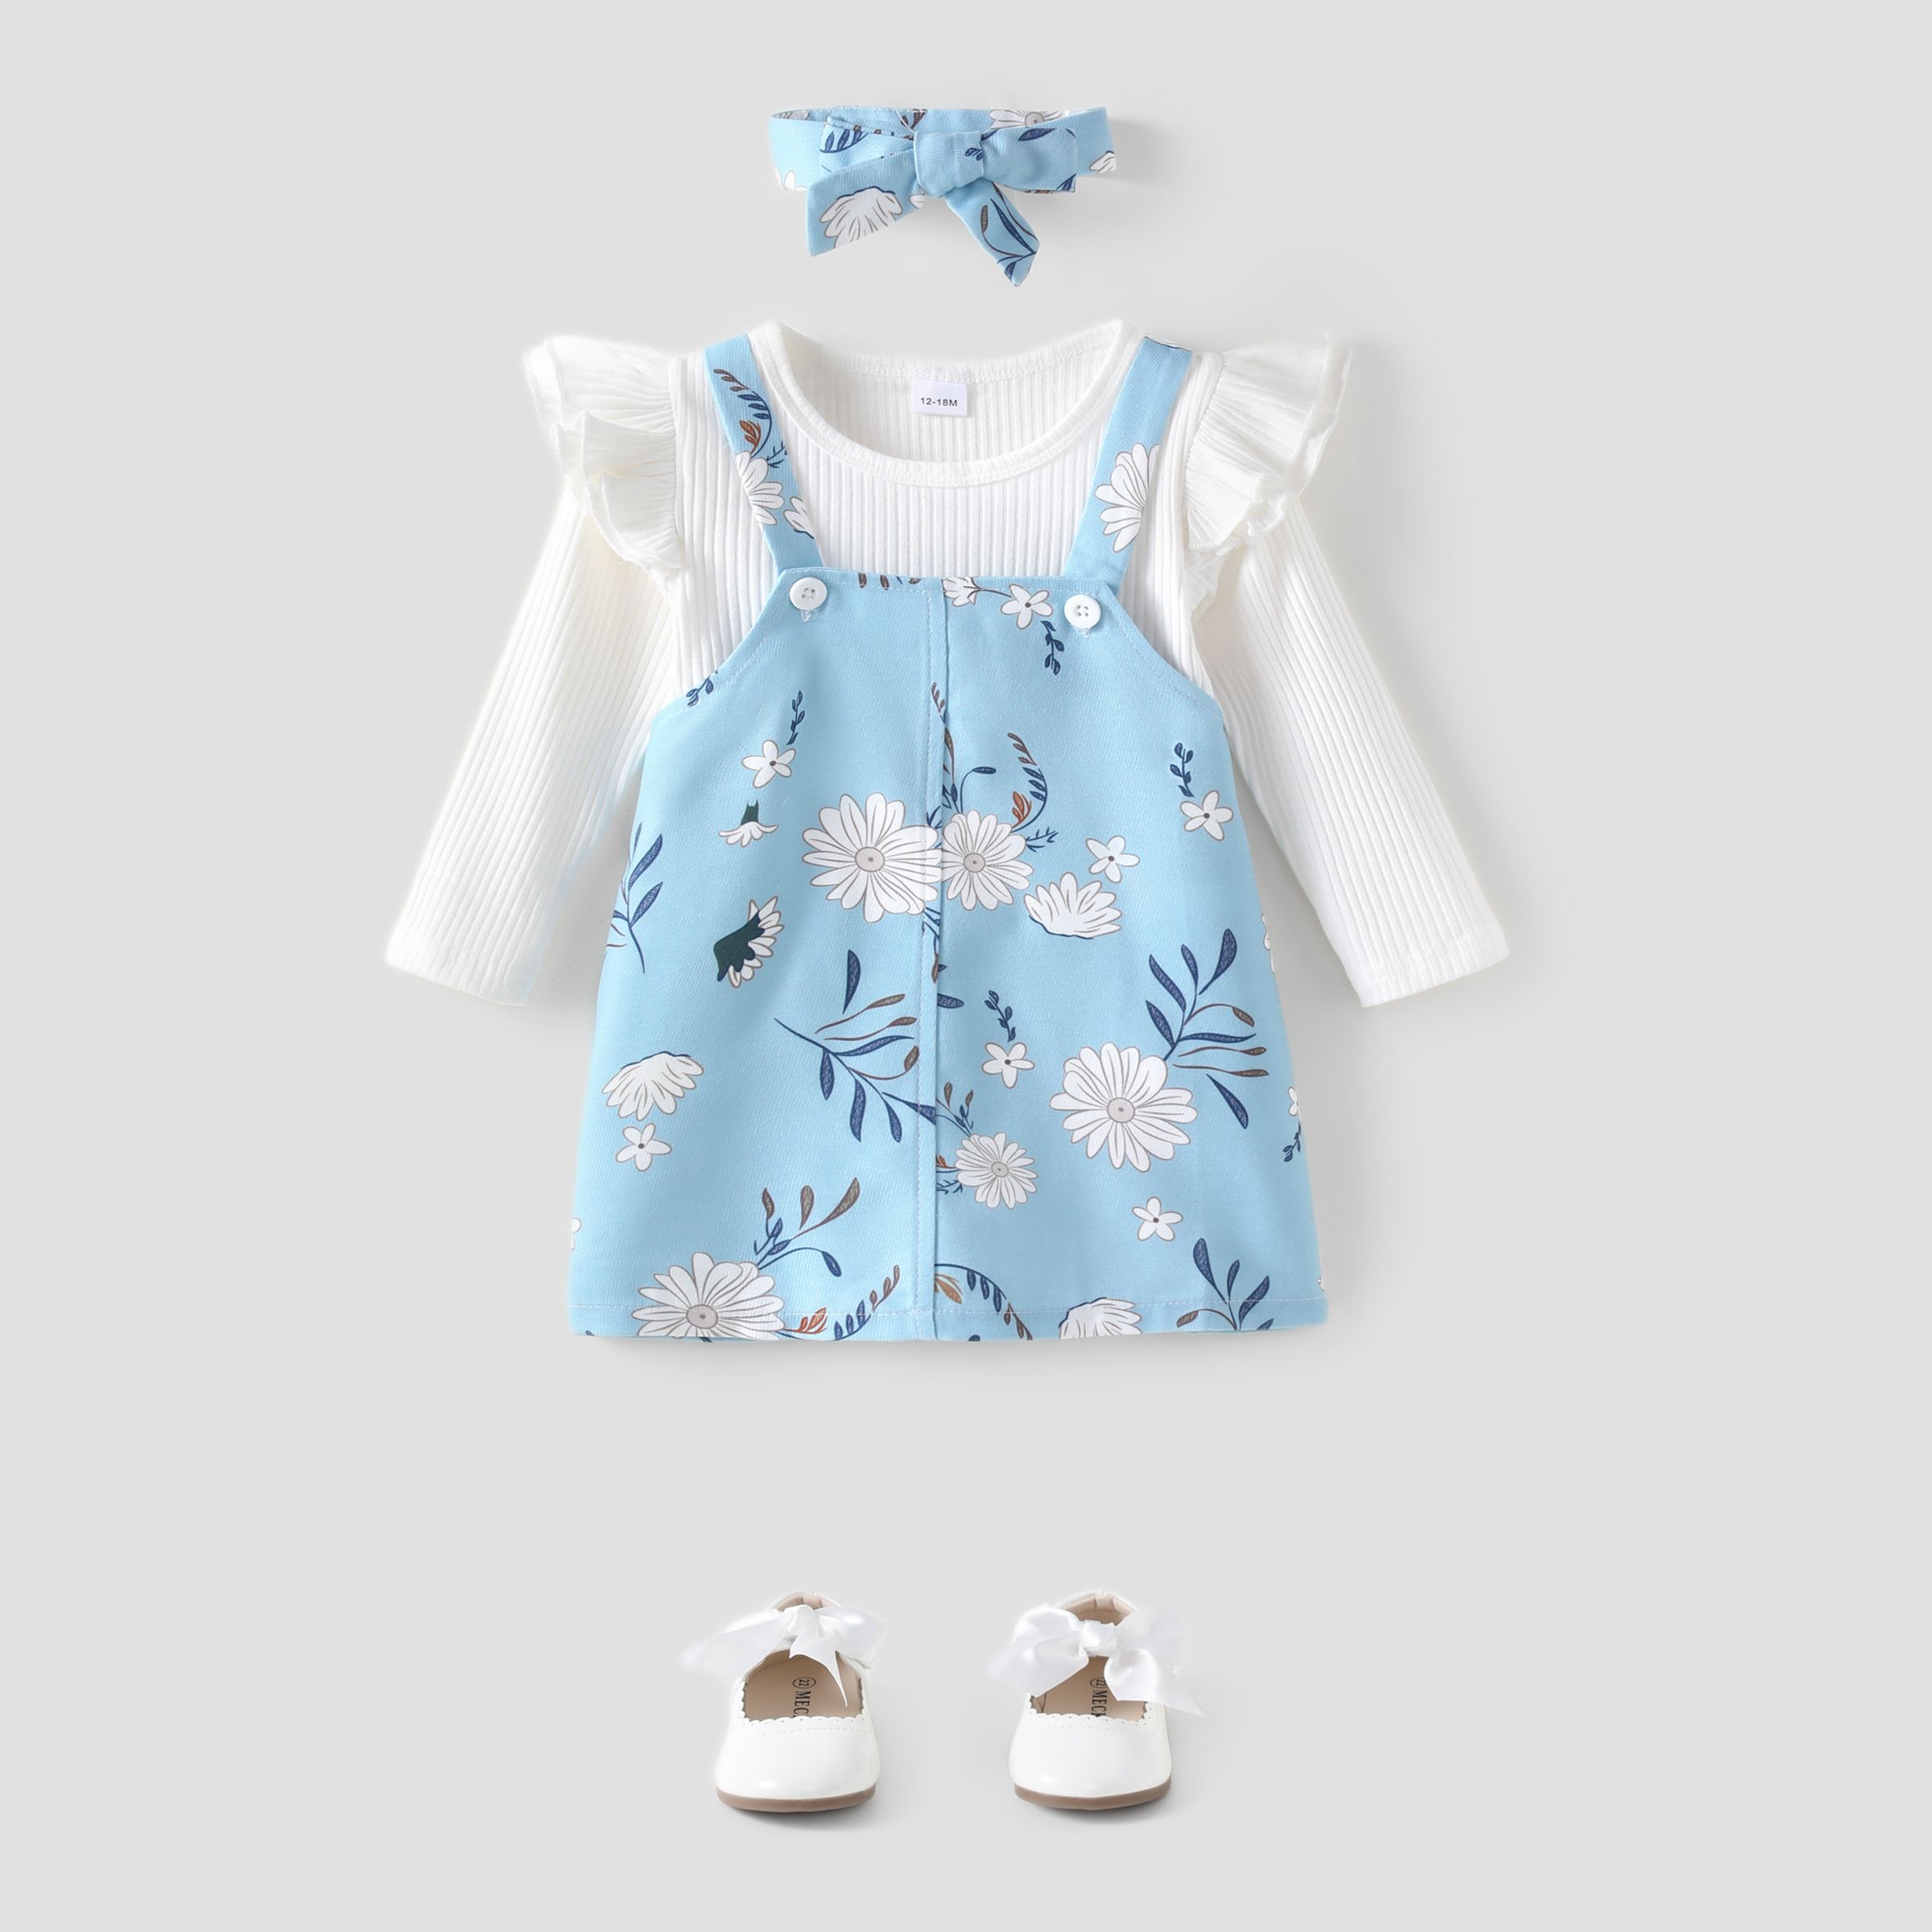 3pcs Baby Girl Solid Rib Knit Ruffle Trim Long-sleeve Top And Floral Print Overall Dress With Headband Set